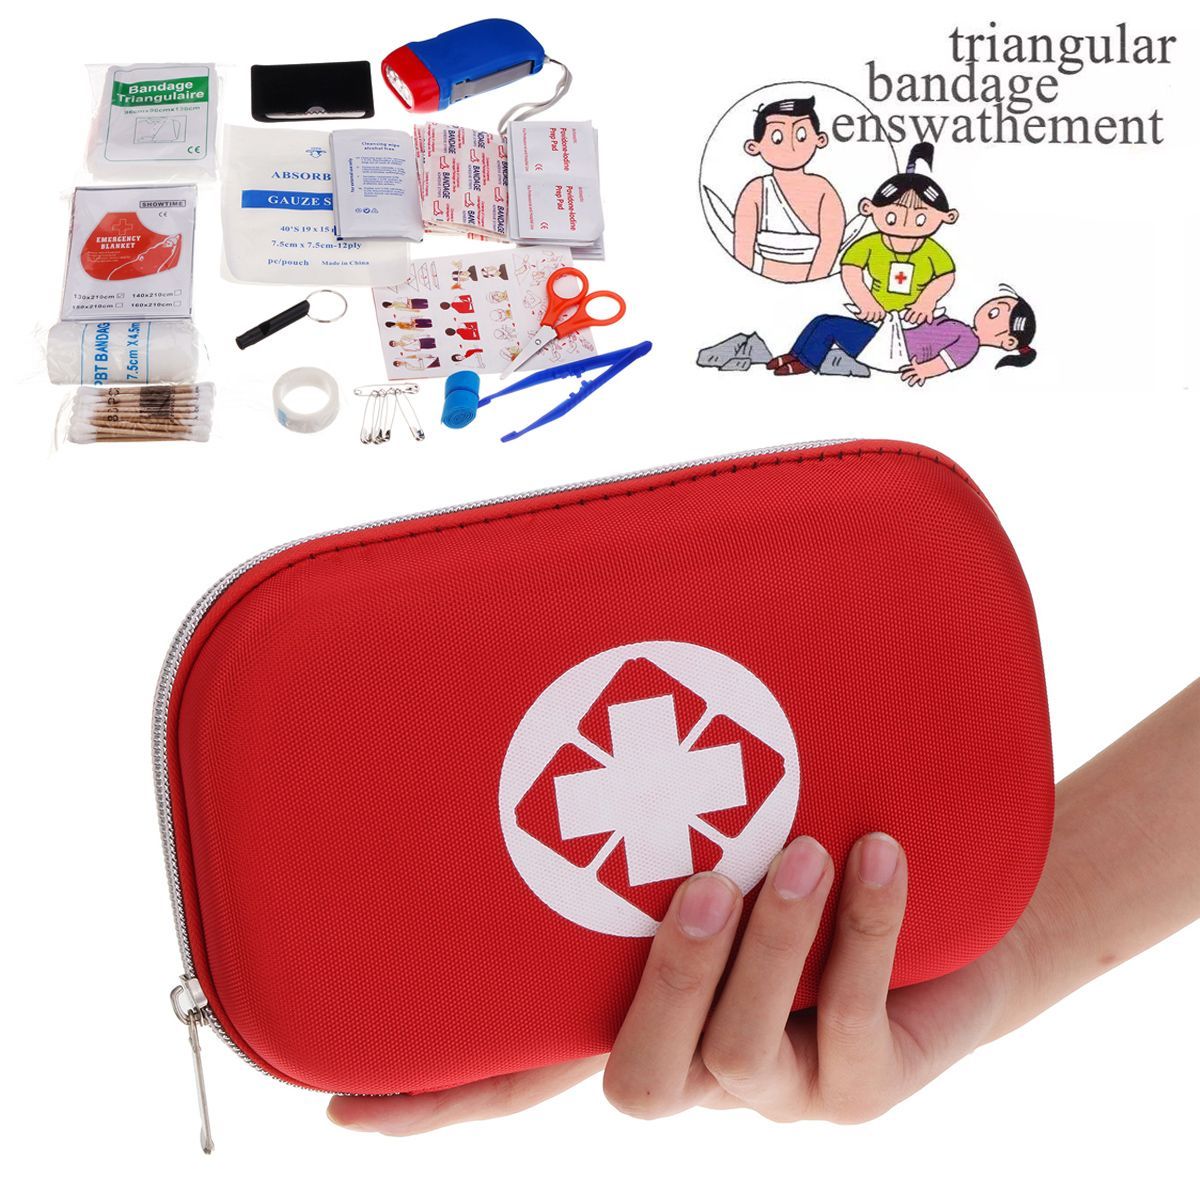 44Pcs-First-Aid-Kit-Emergency-Supplies-Home-Office-Travel-Survival-Medical-Bag-Kit-1552597